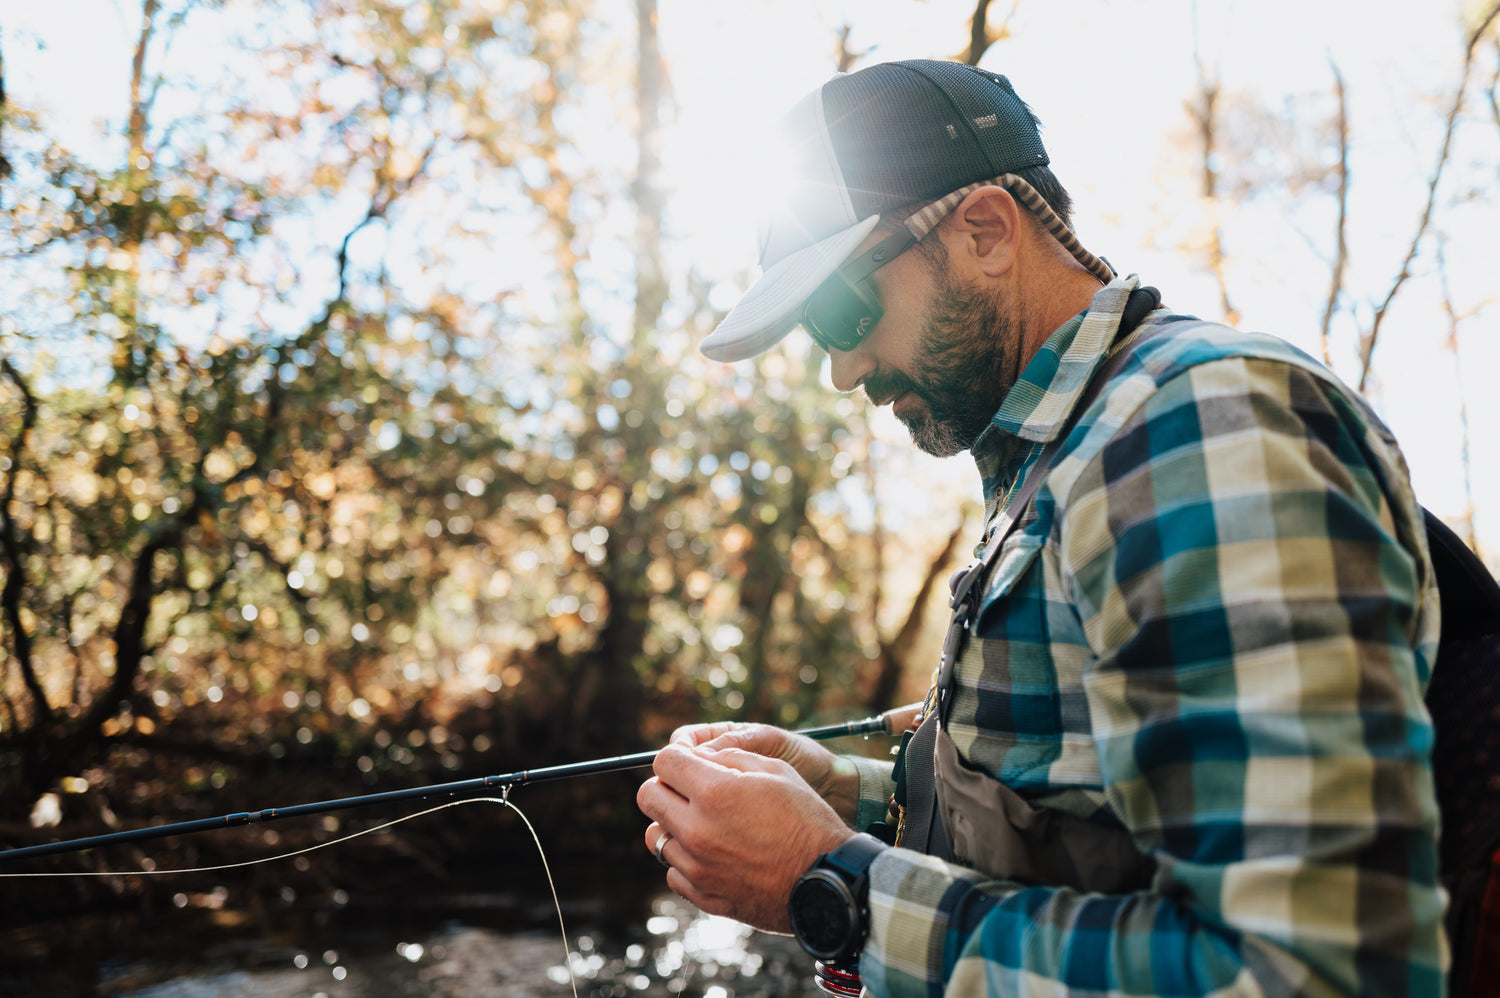 Fly Fishing Streamers 201: Strategies for Rigging, Casting, and Retrieving